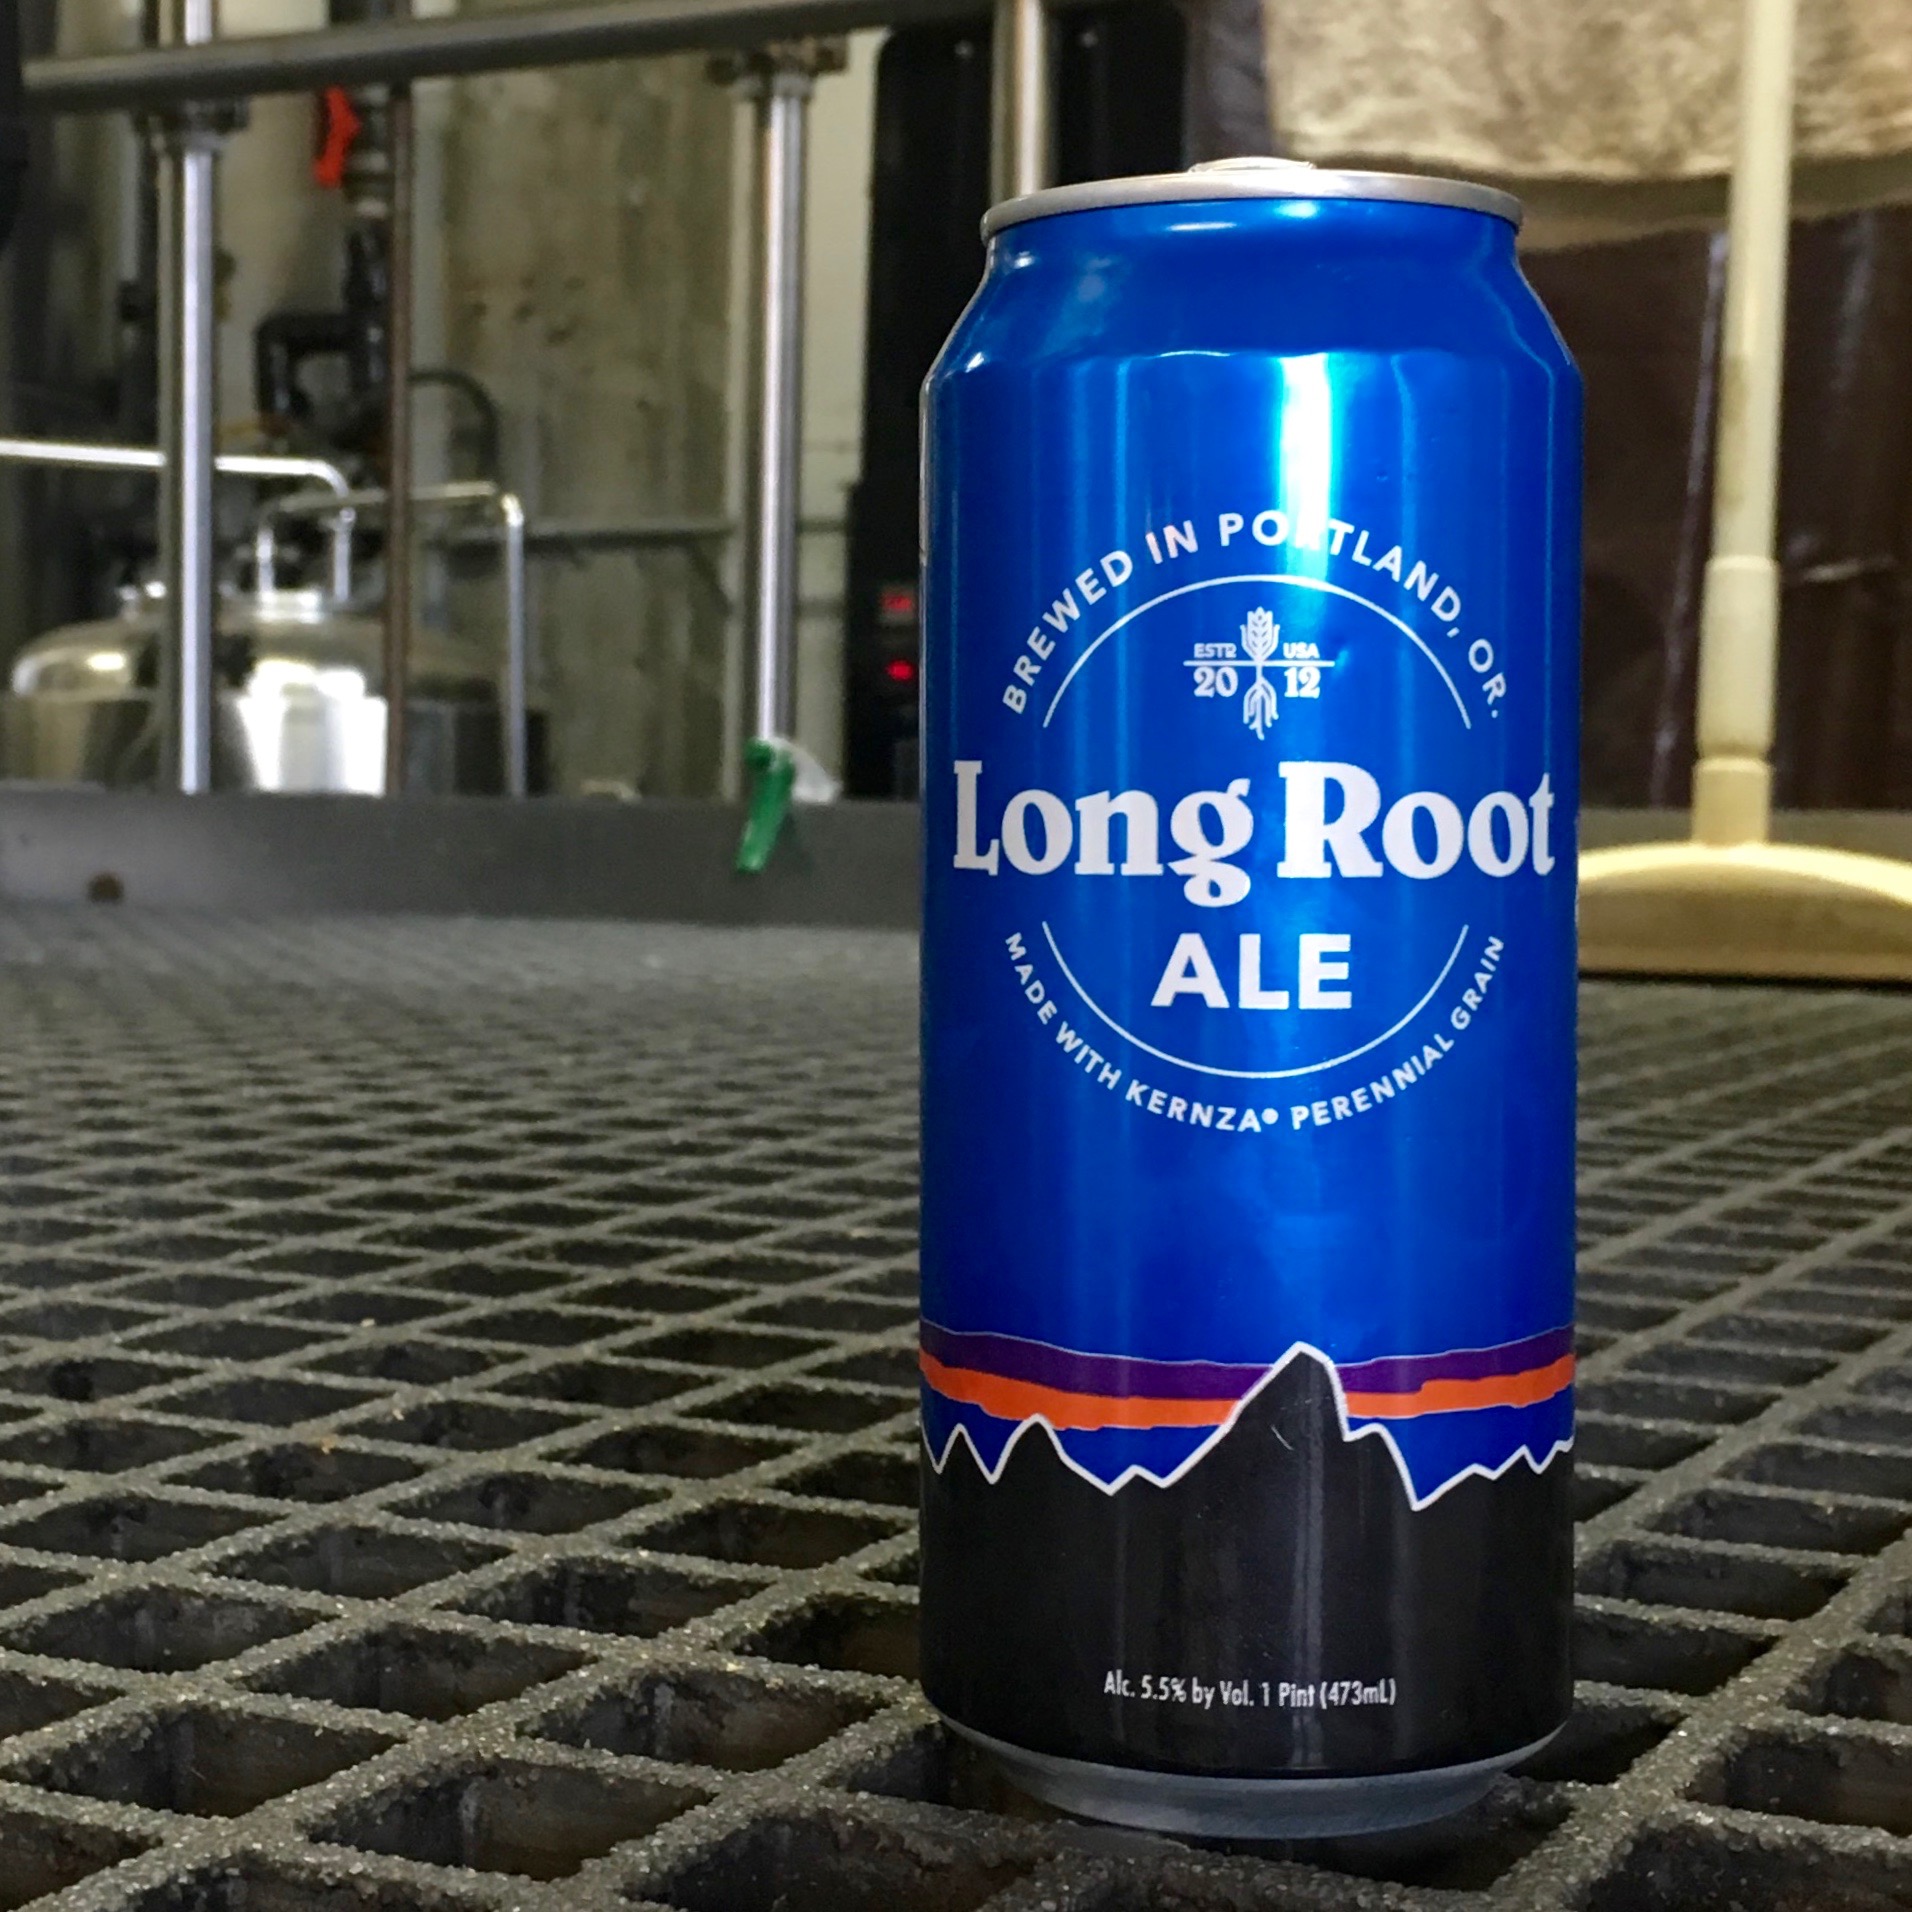 A can of Hopworks Urban Brewery and Patagonia Provisions Long Root Ale, brewed with Kernza perennial grain on the brewdeck.